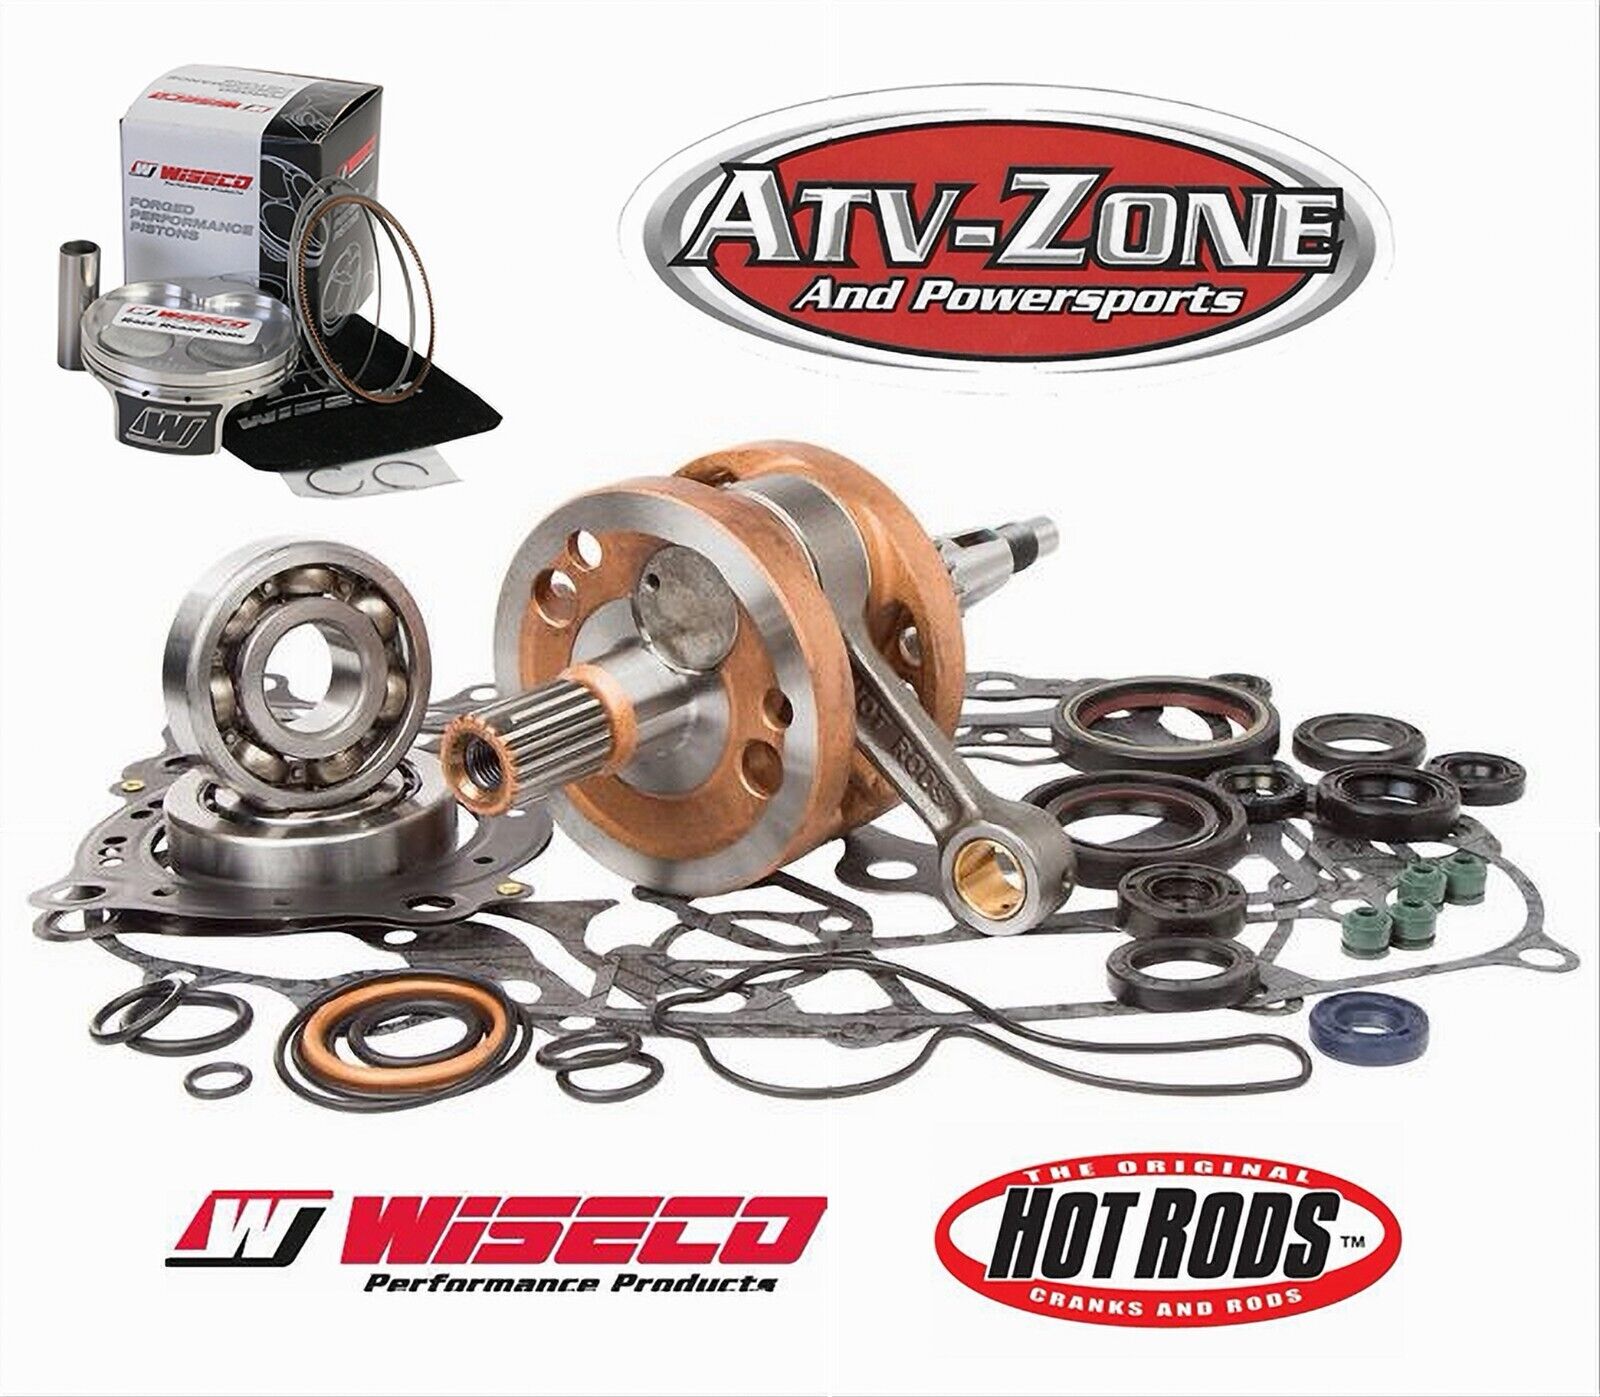 Hot Rods Bottom End Kit and Wiseco Piston 12.0:1 96mm Honda CRF 450R 2002-2005